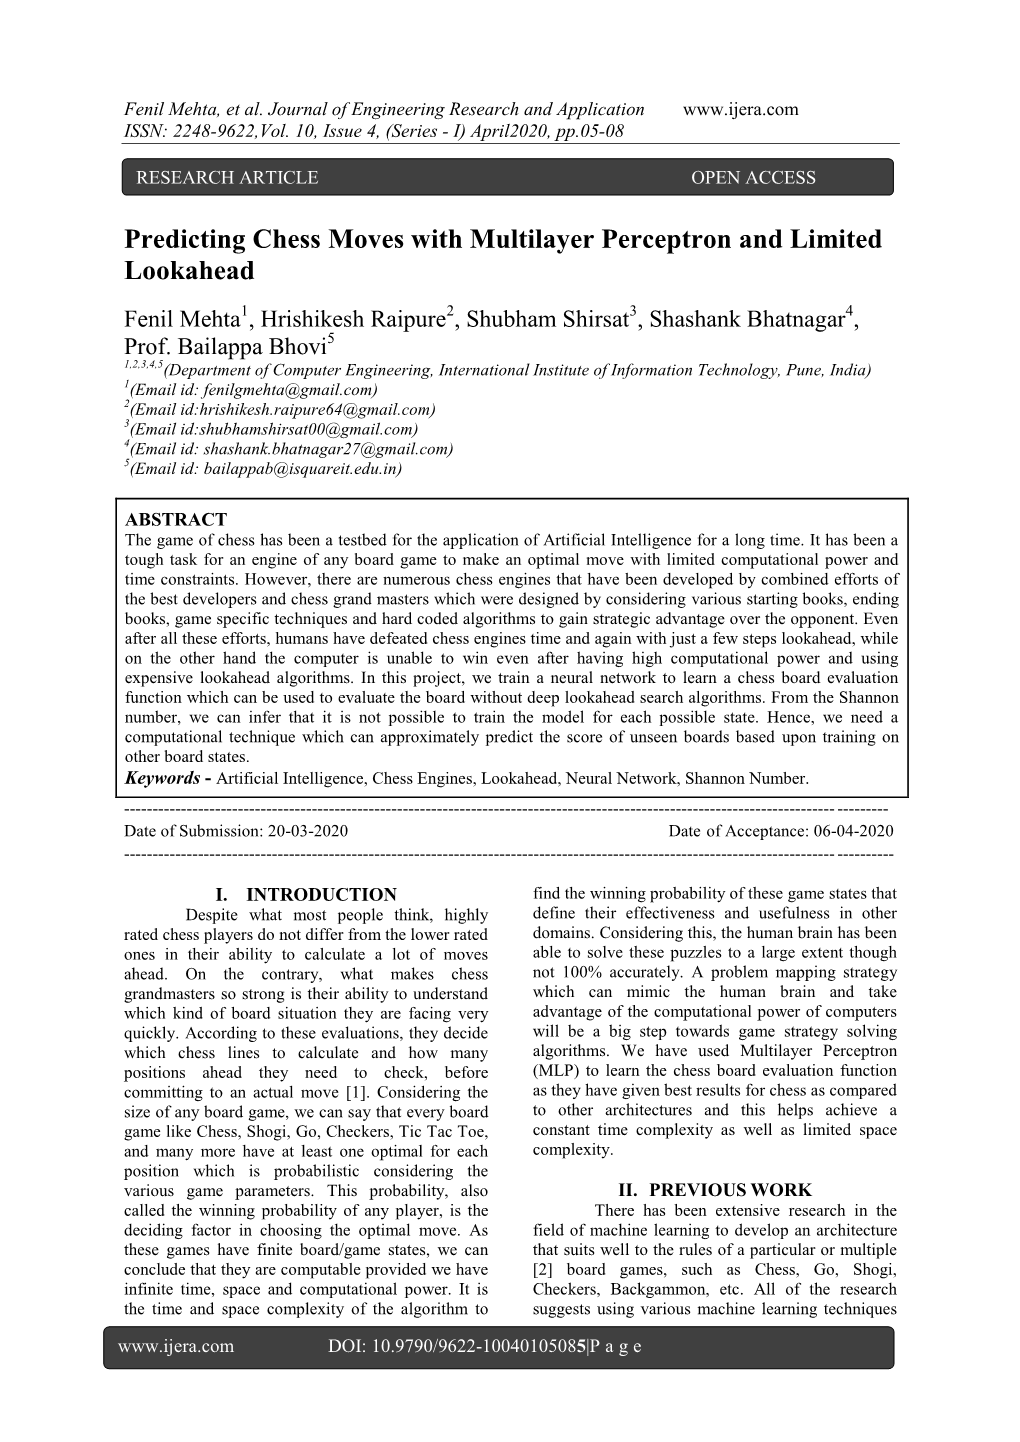 Predicting Chess Moves with Multilayer Perceptron and Limited Lookahead